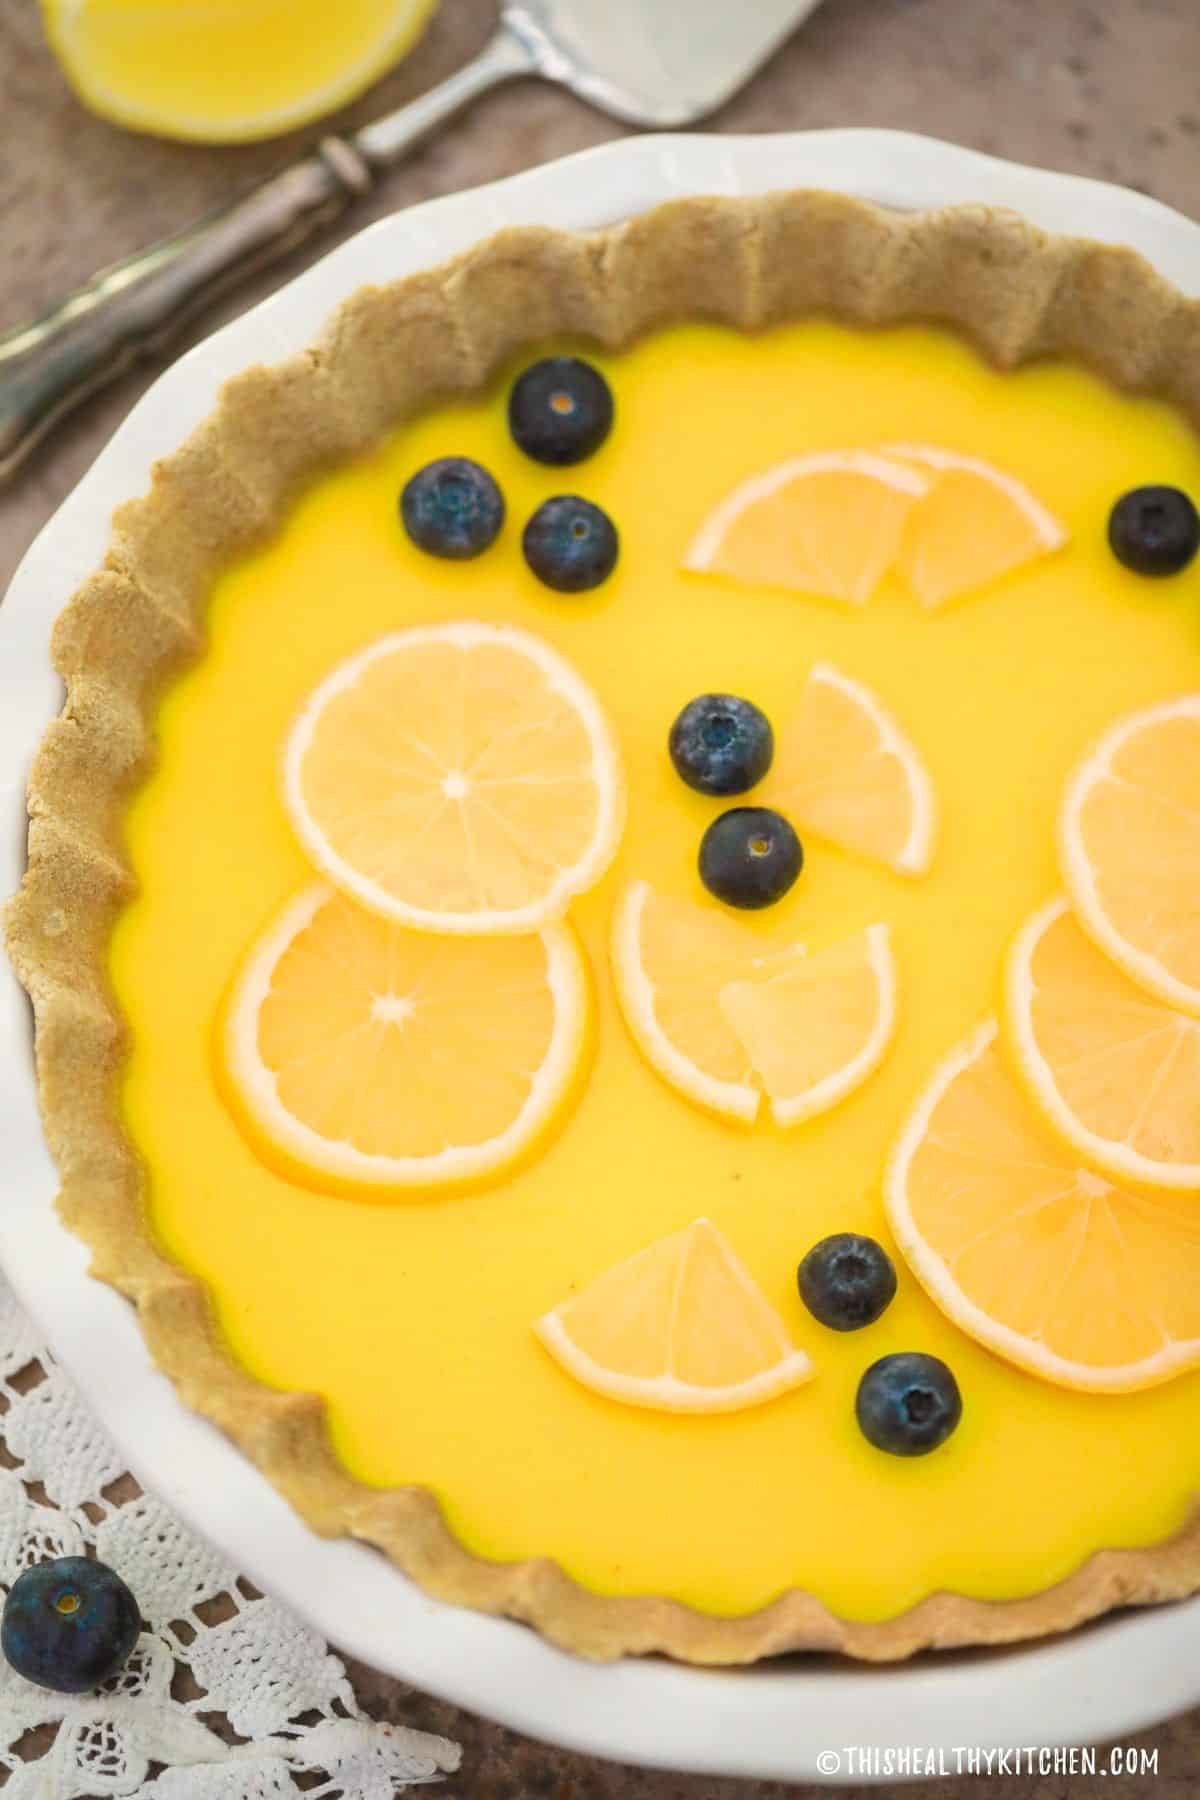 Lemon pie with lemon slices and blueberries on top.